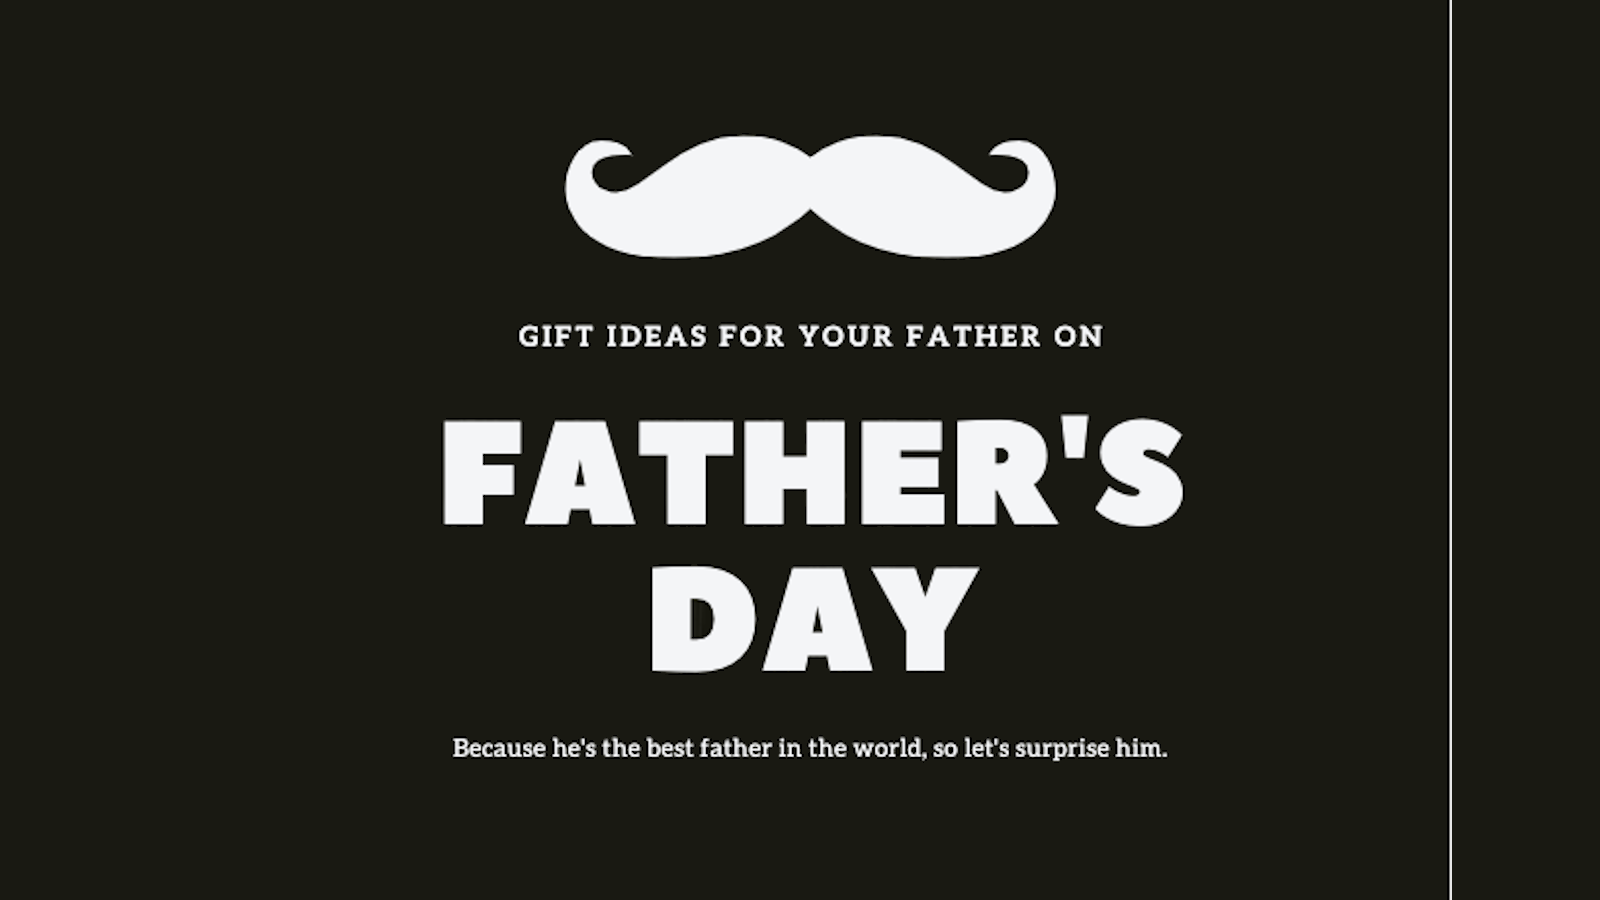 Happy Father’s Day 2020: Gift ideas on this father’s day date 21st June 2020